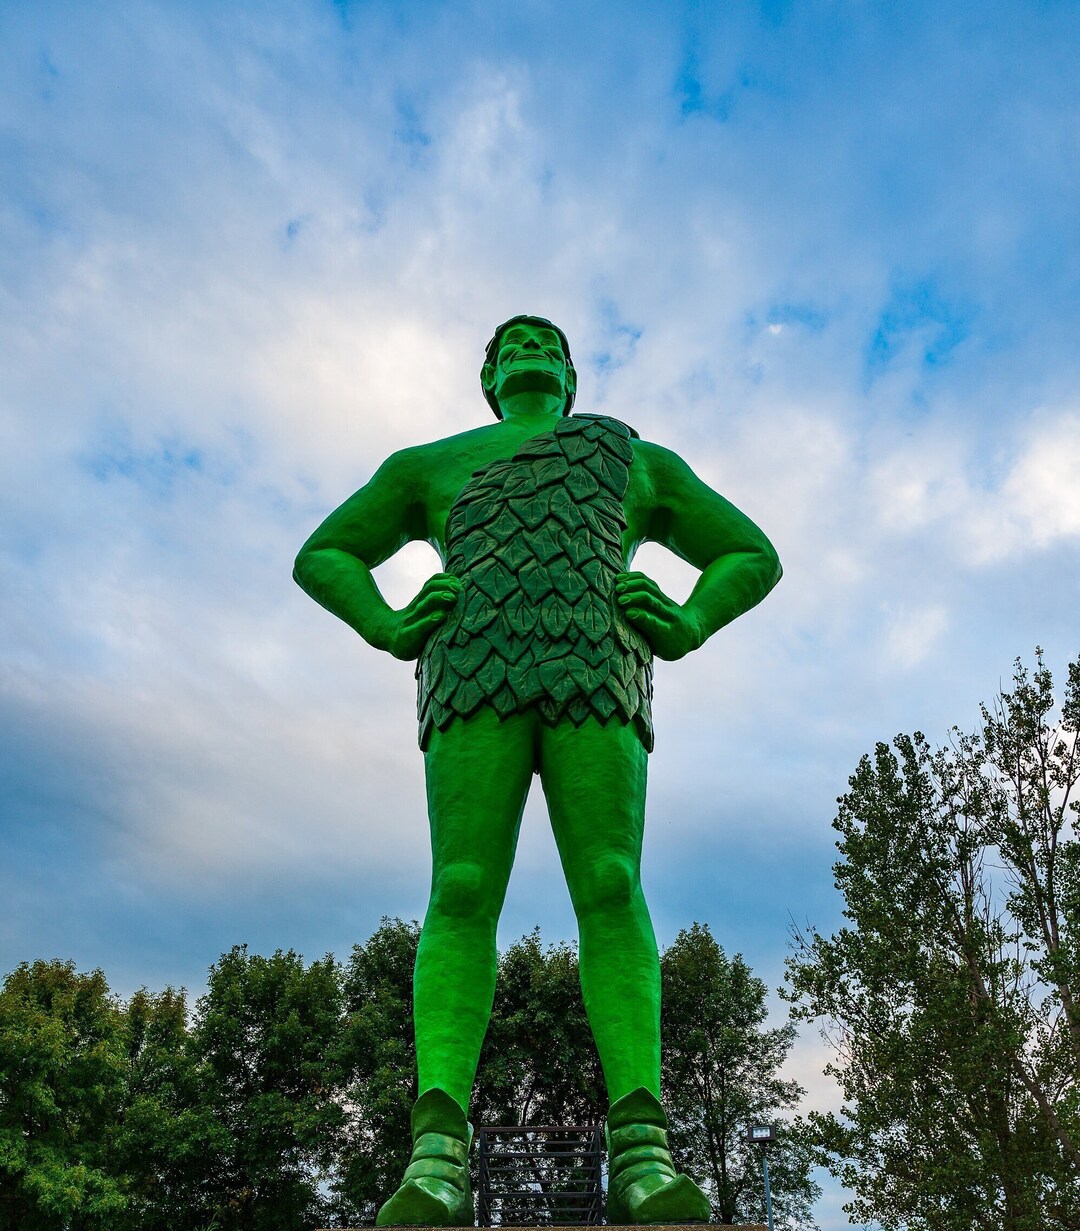 Green Giant Statue In Blue Earth Minnesota Poster Print Etsy